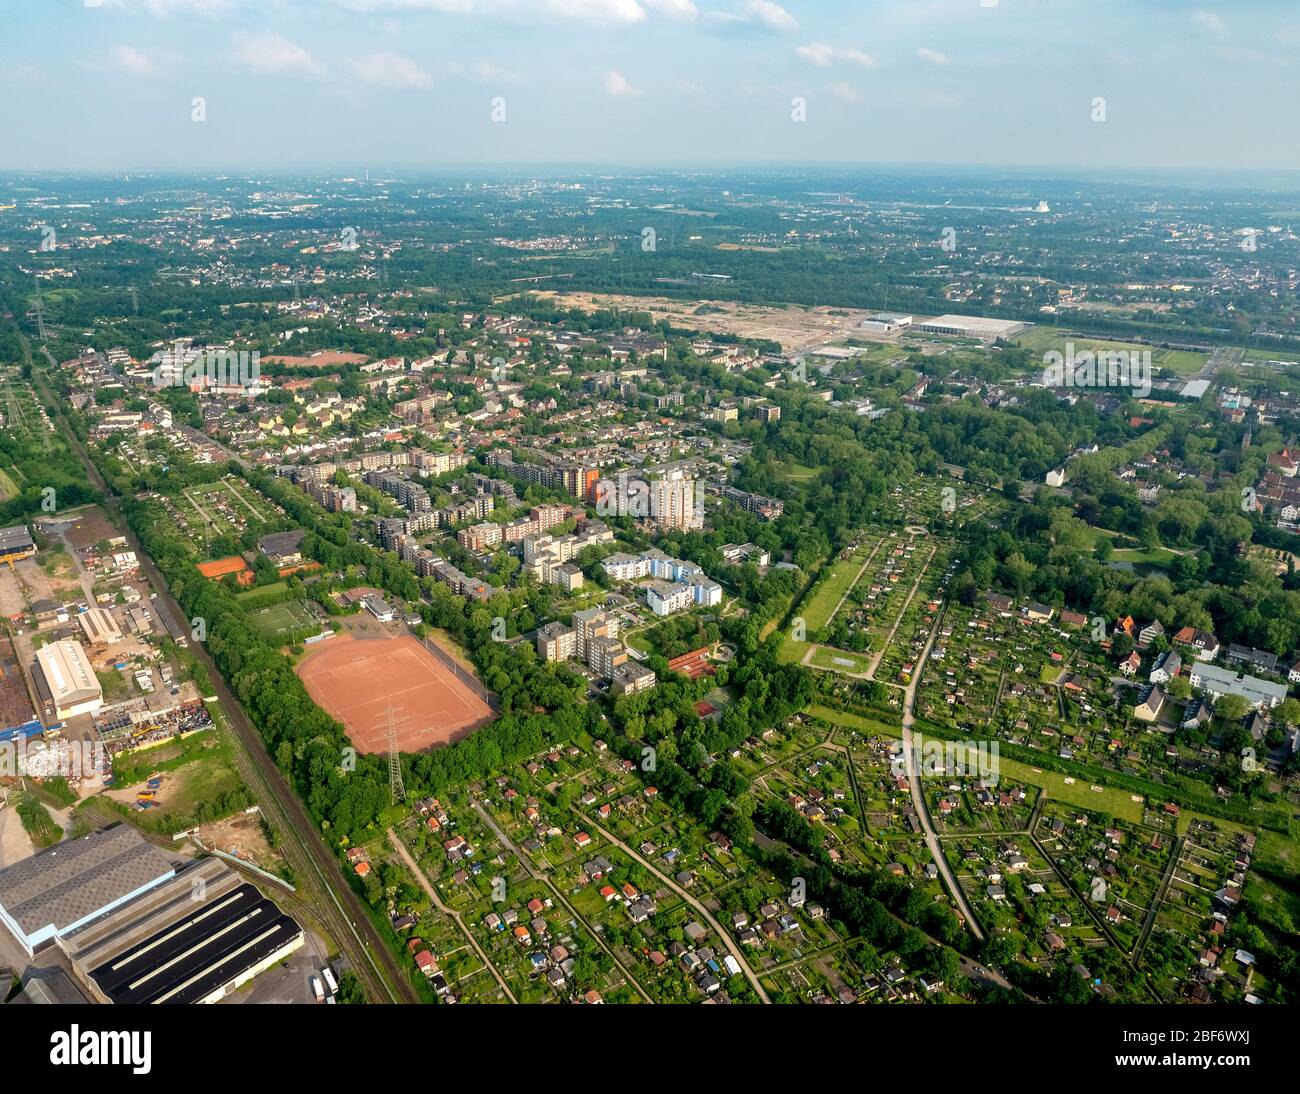 Bulmke-Huellen with sports facilities, allotements and residential areas on Doermannsweg in Gelsenkirchen, 26.05.2016, aerial view, Germany, North Rhine-Westphalia, Ruhr Area, Gelsenkirchen Stock Photo